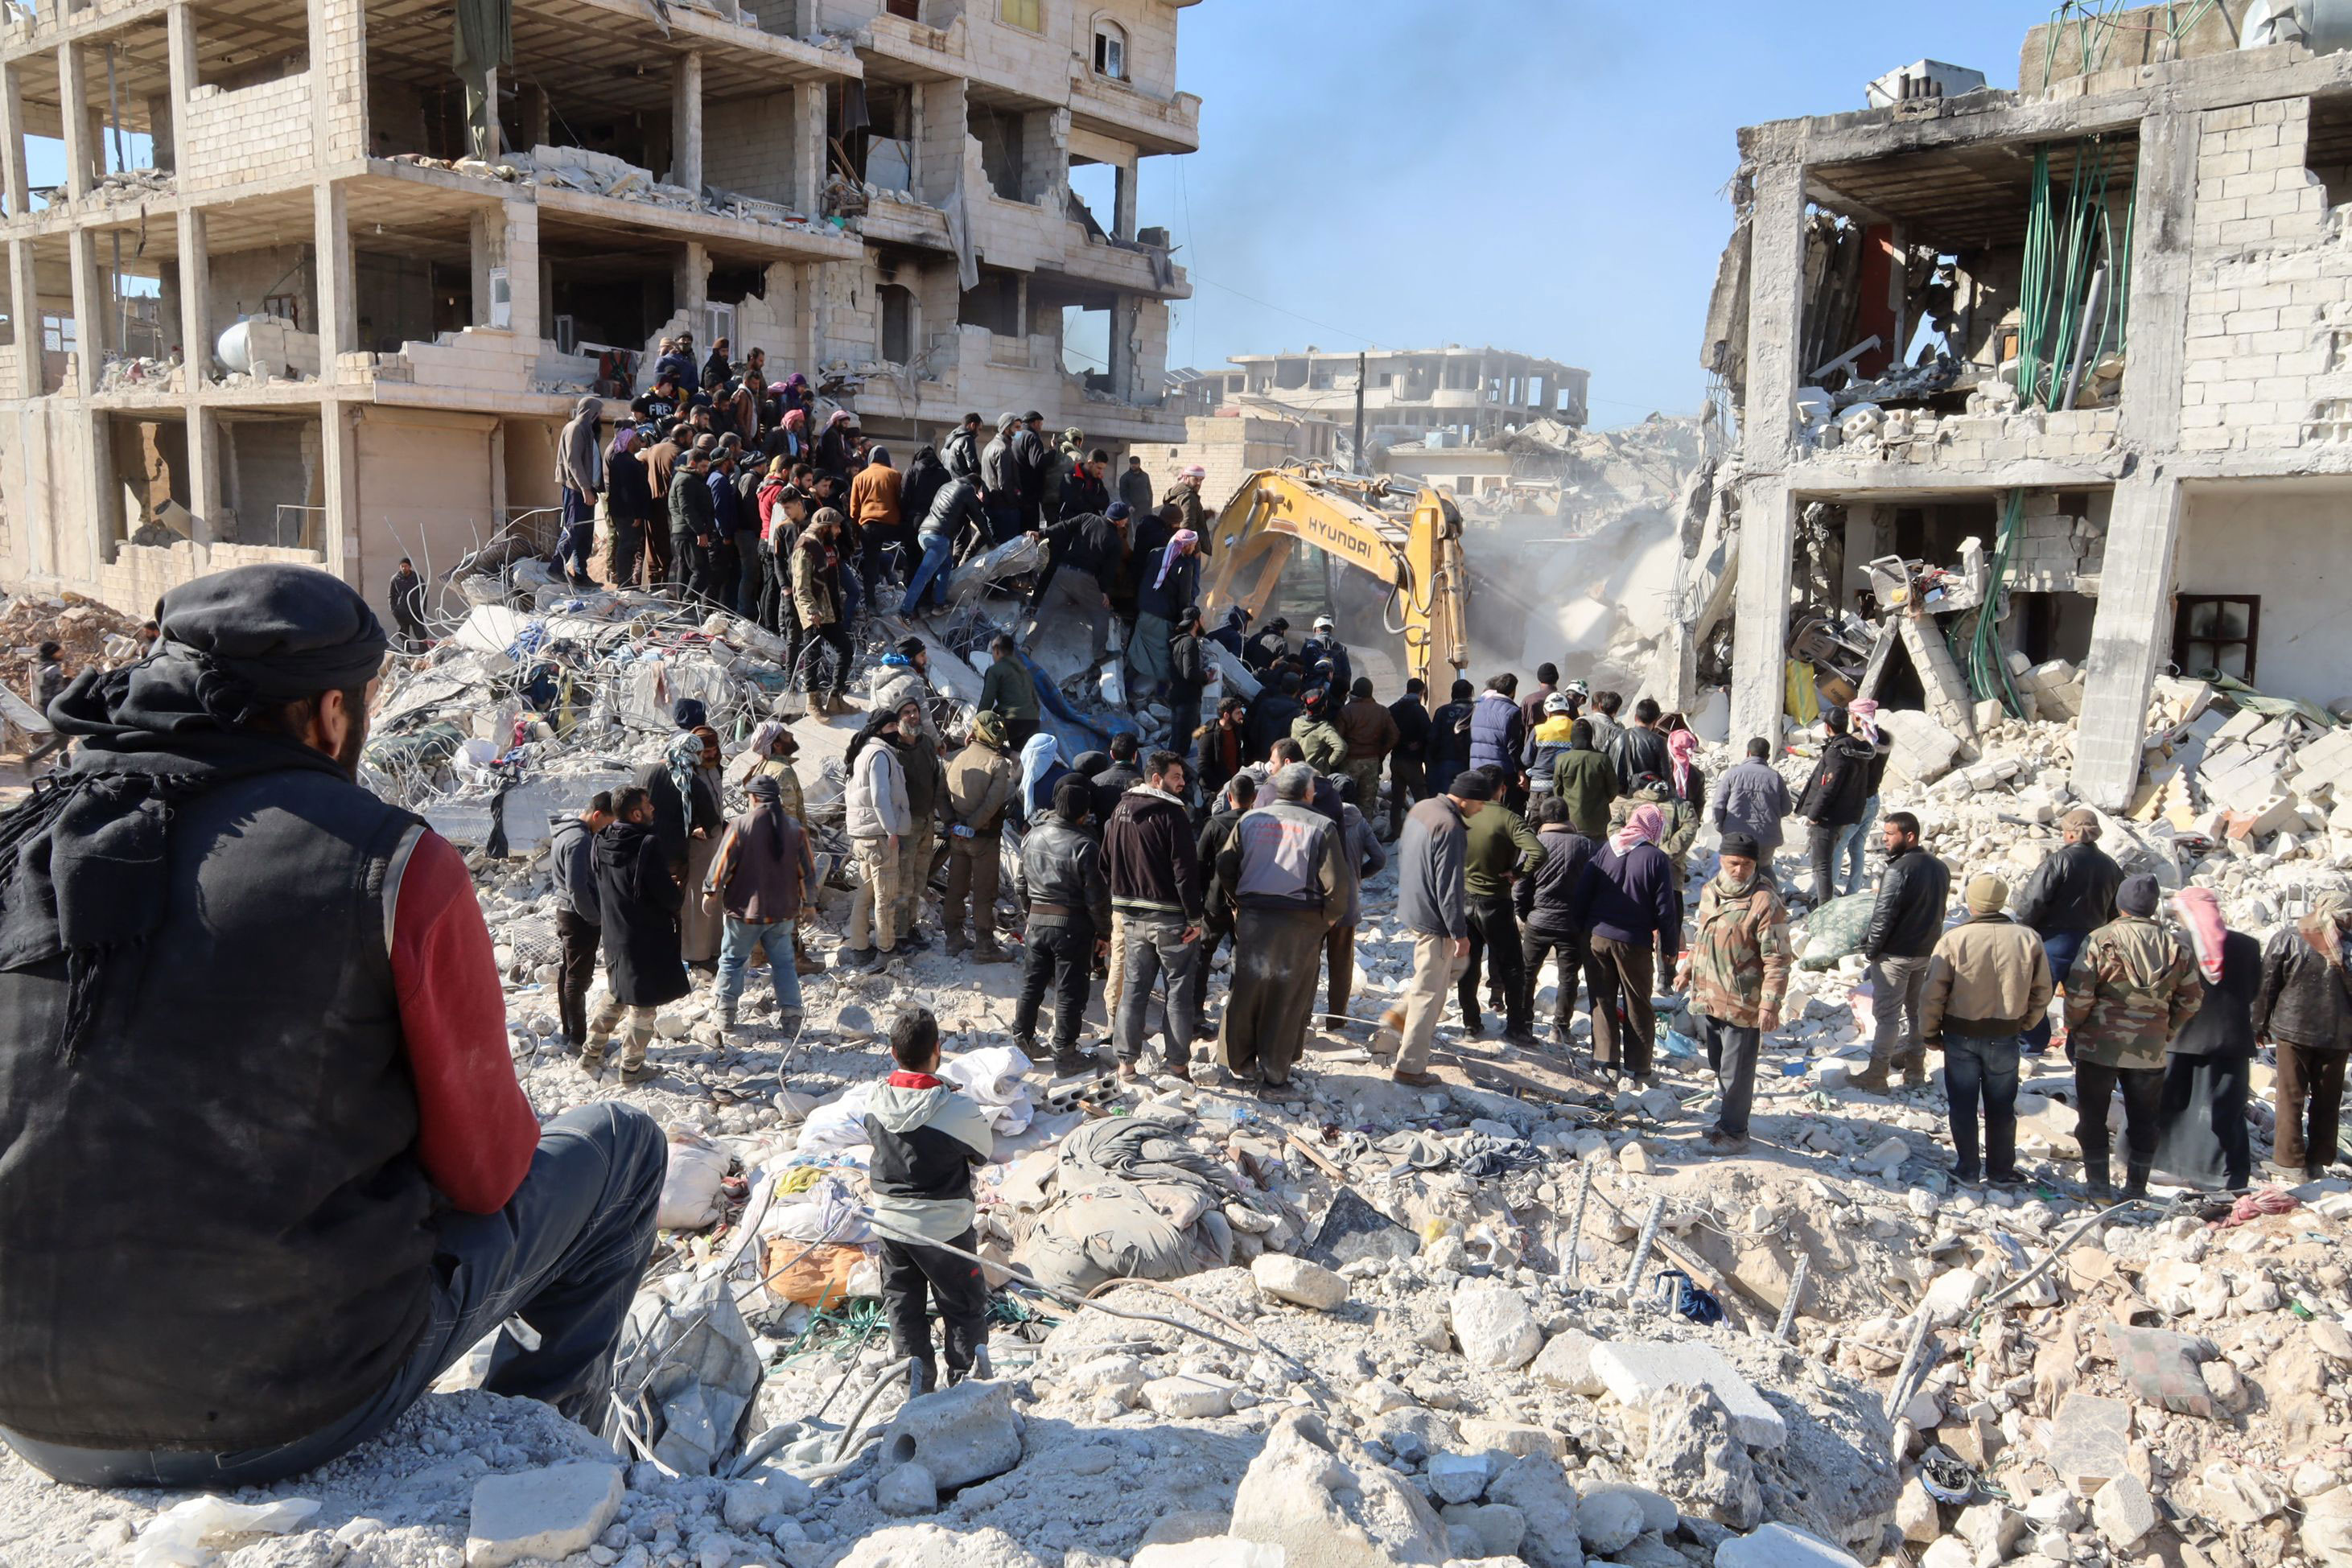 Rescue workers look for survivors amid the rubble of a building in Jindayris, Syria on February 9. 